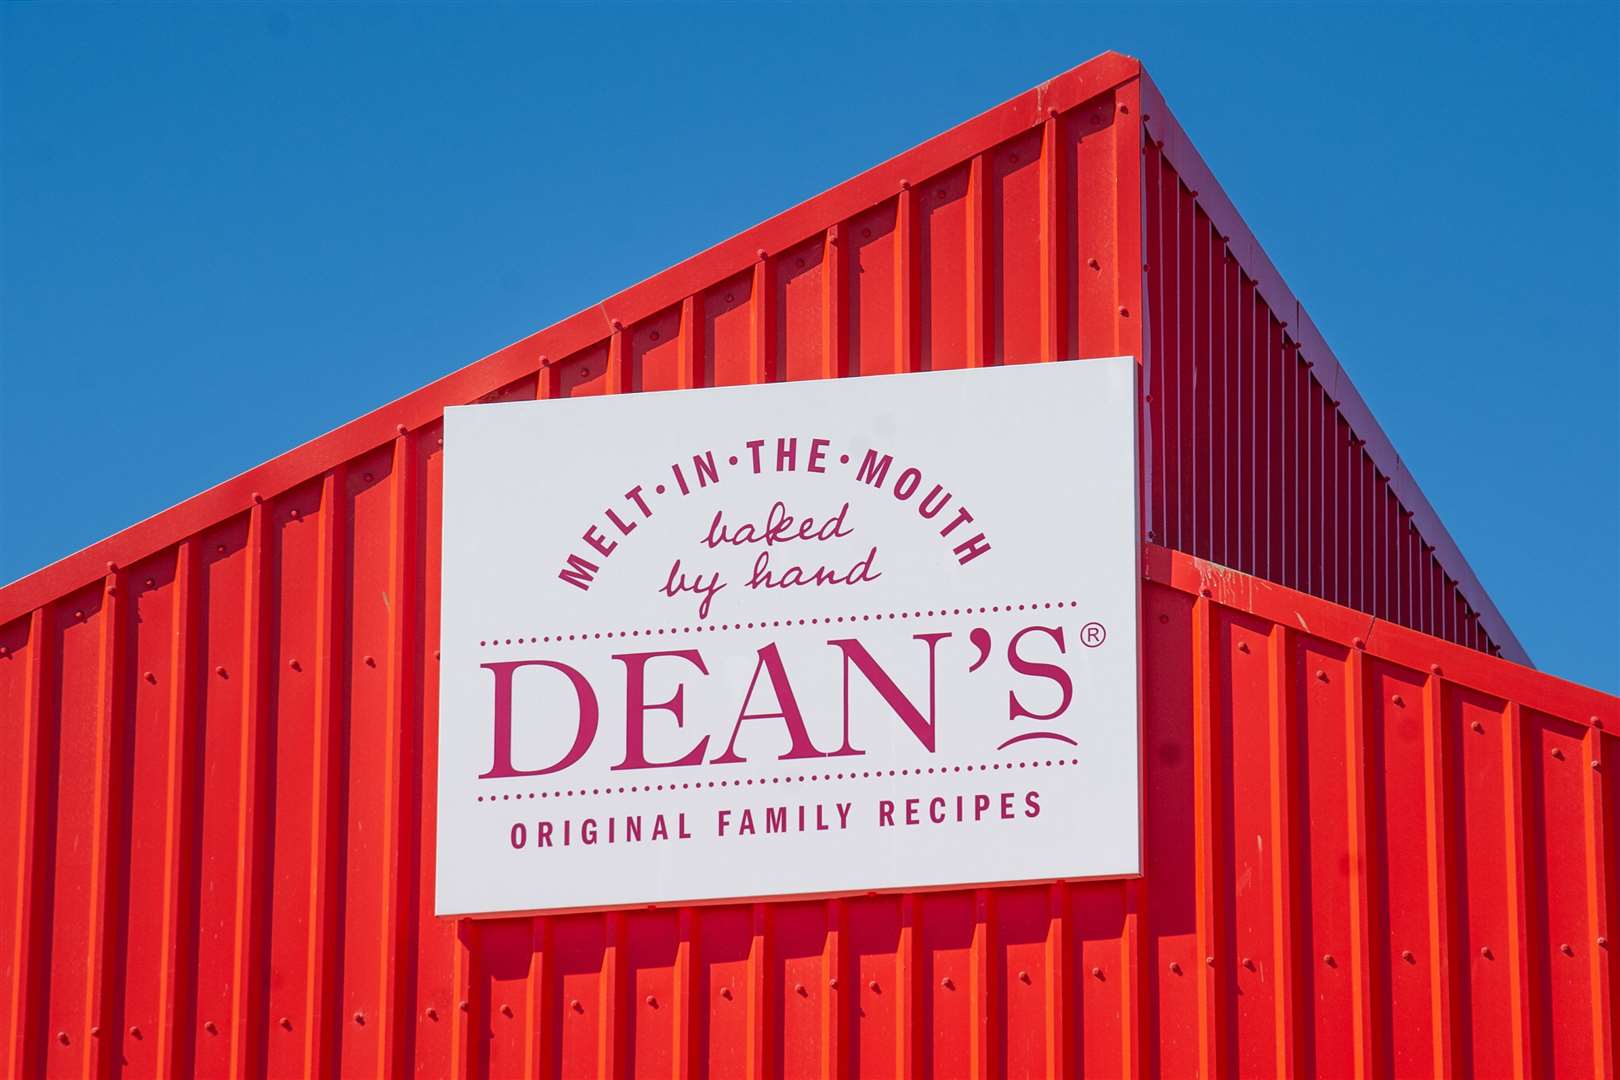 Dean's of Huntly will sponsor the Scottish Men's Shed Awards this year.  Photo: Daniel Forsyth